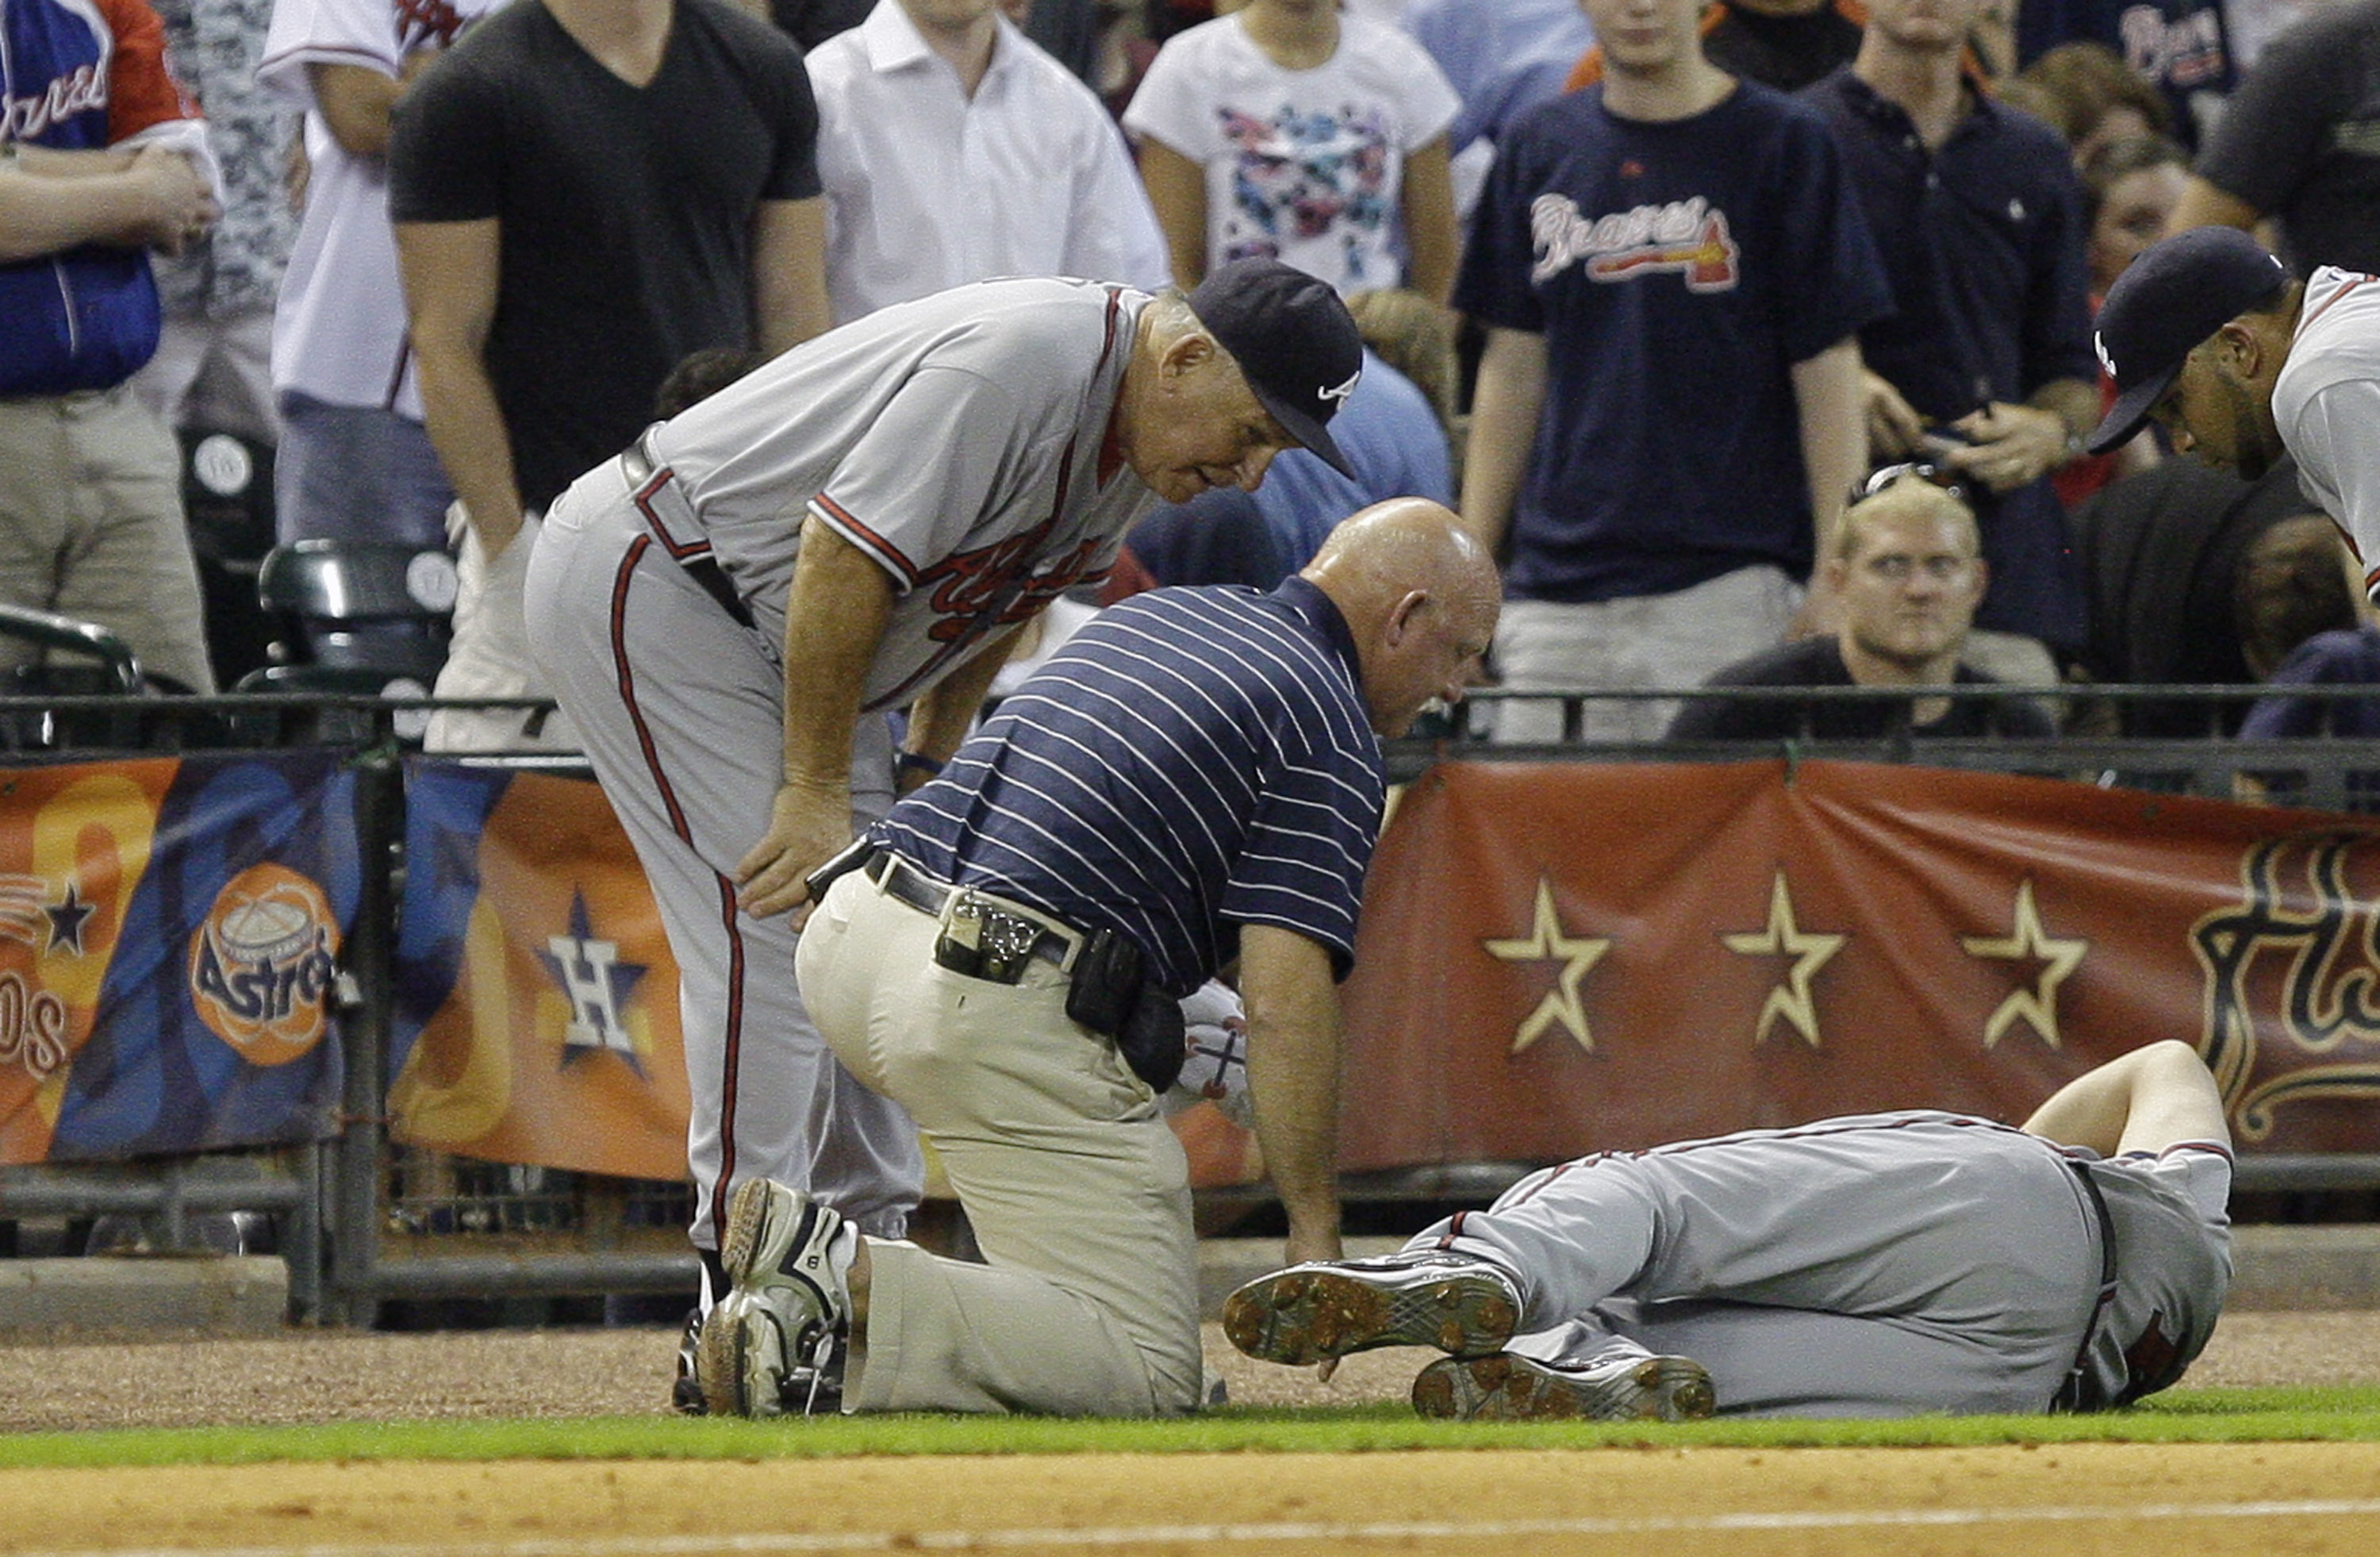 HOUSTON - AUGUST 10:  Third baseman Chipper Jones #10 of the Atlanta Braves is tended to by the trainer and manager Bobby Cox after coming down awkardly behind the base at Minute Maid Park on August 10, 2010 in Houston, Texas. Jones left the game after in